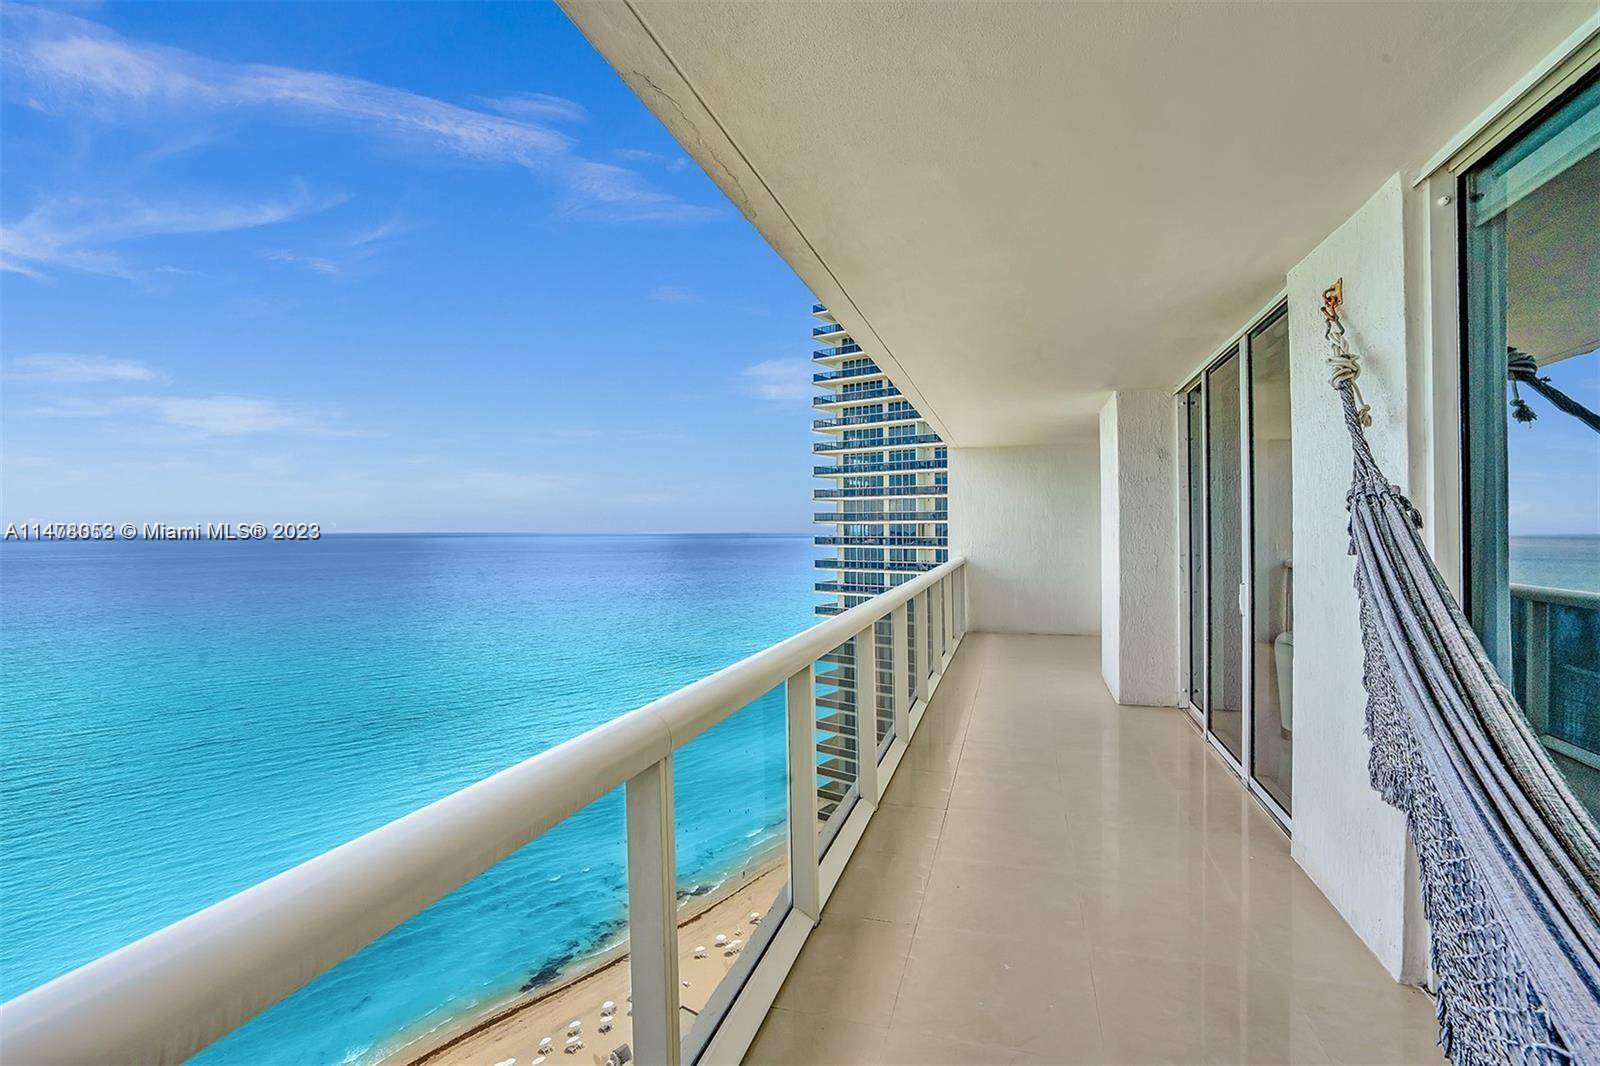 Five star vacation rental on the oceanfront building with direct ocean views.